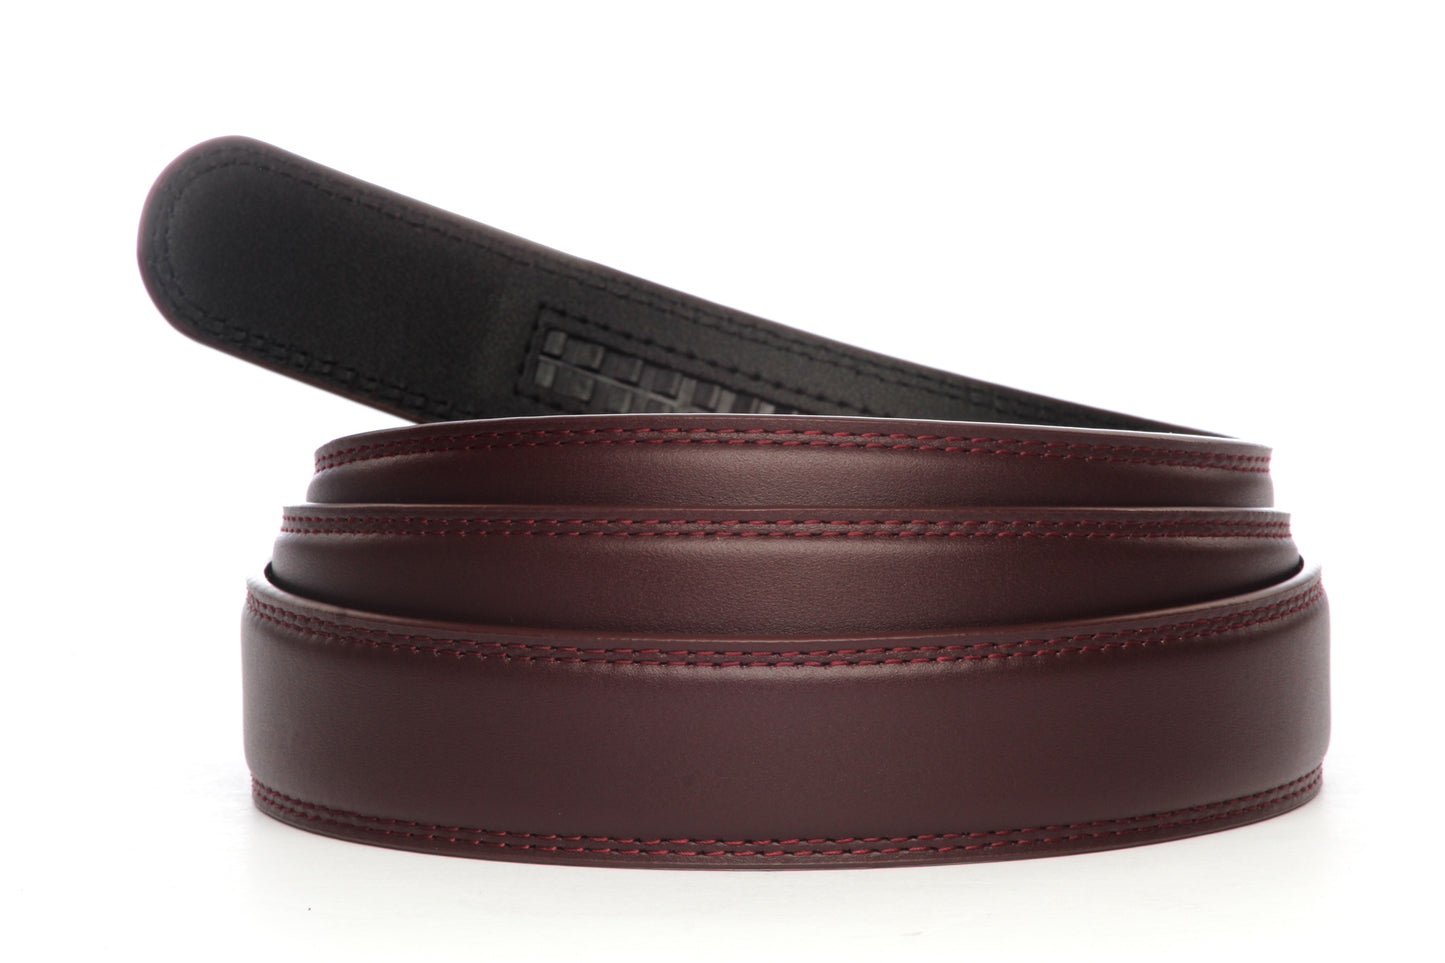 Men's leather belt strap in oxblood with a 1.25-inch width, formal look, back texture